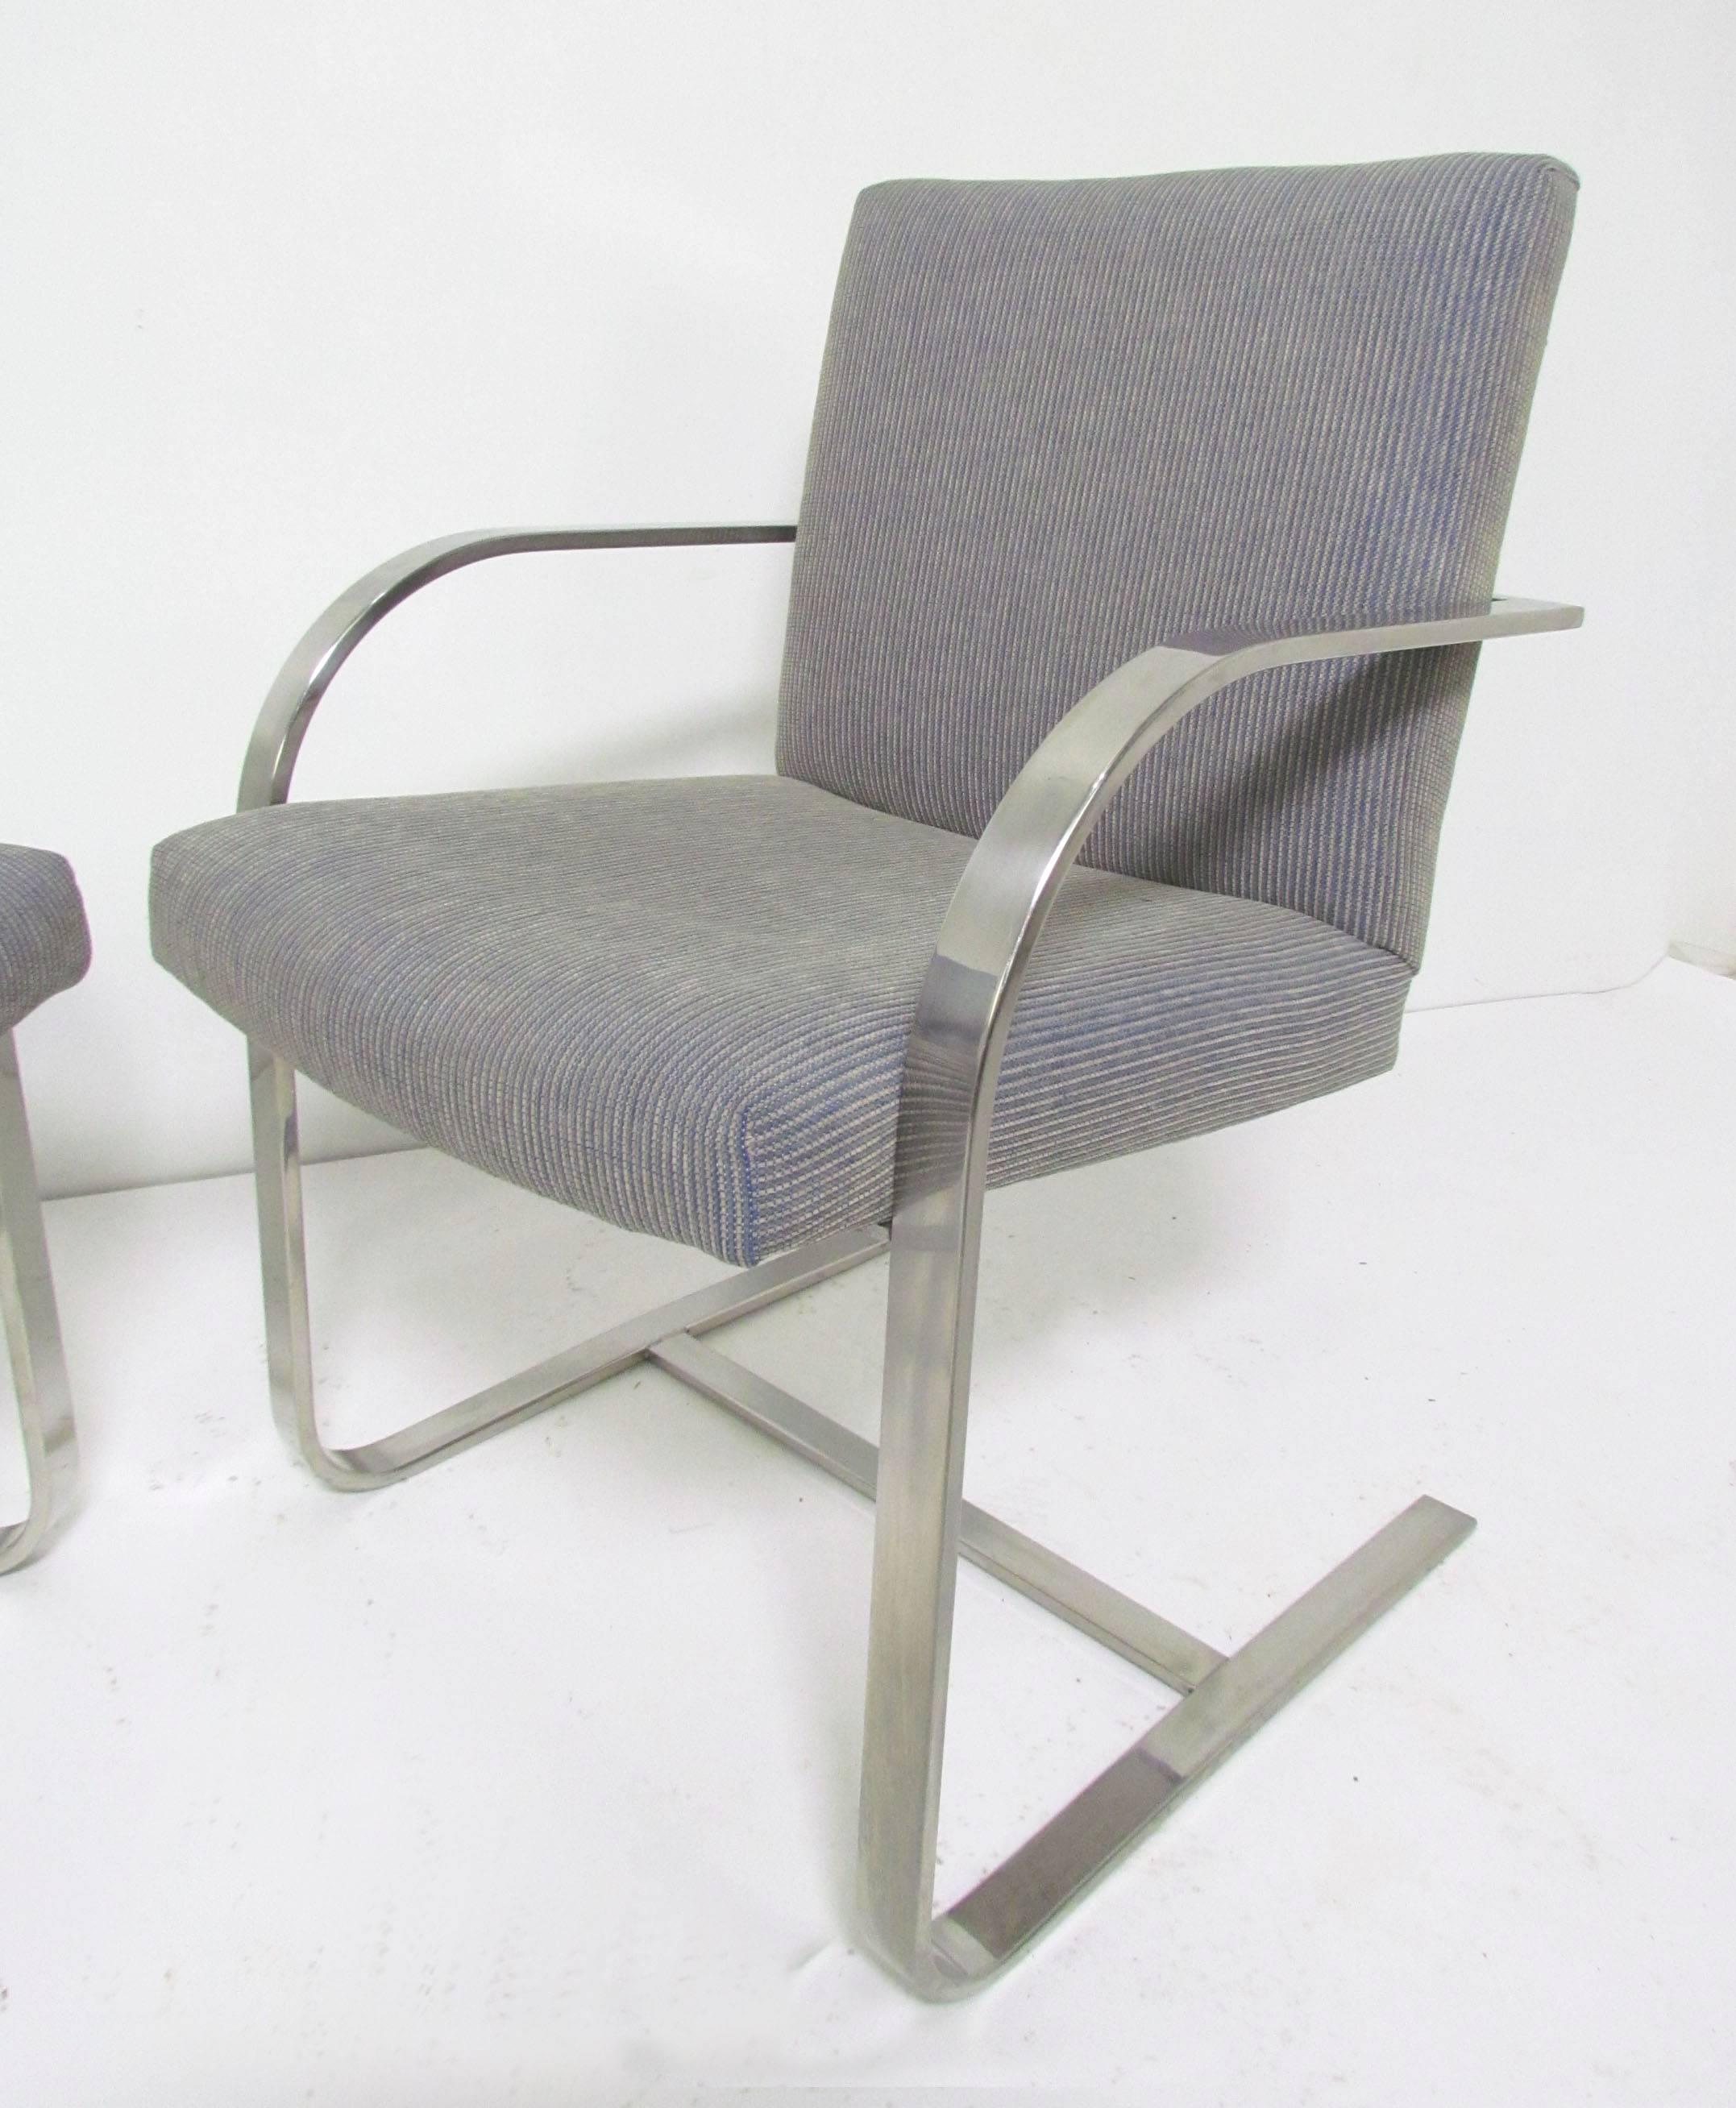 Set of four flat bar chrome cantilever chairs, in the style of Mies van der Rohe's iconic Brno chairs. This set with chrome back bar, attributed to Brueton, circa 1970s.

Please see our other listings for another set of four in same upholstery